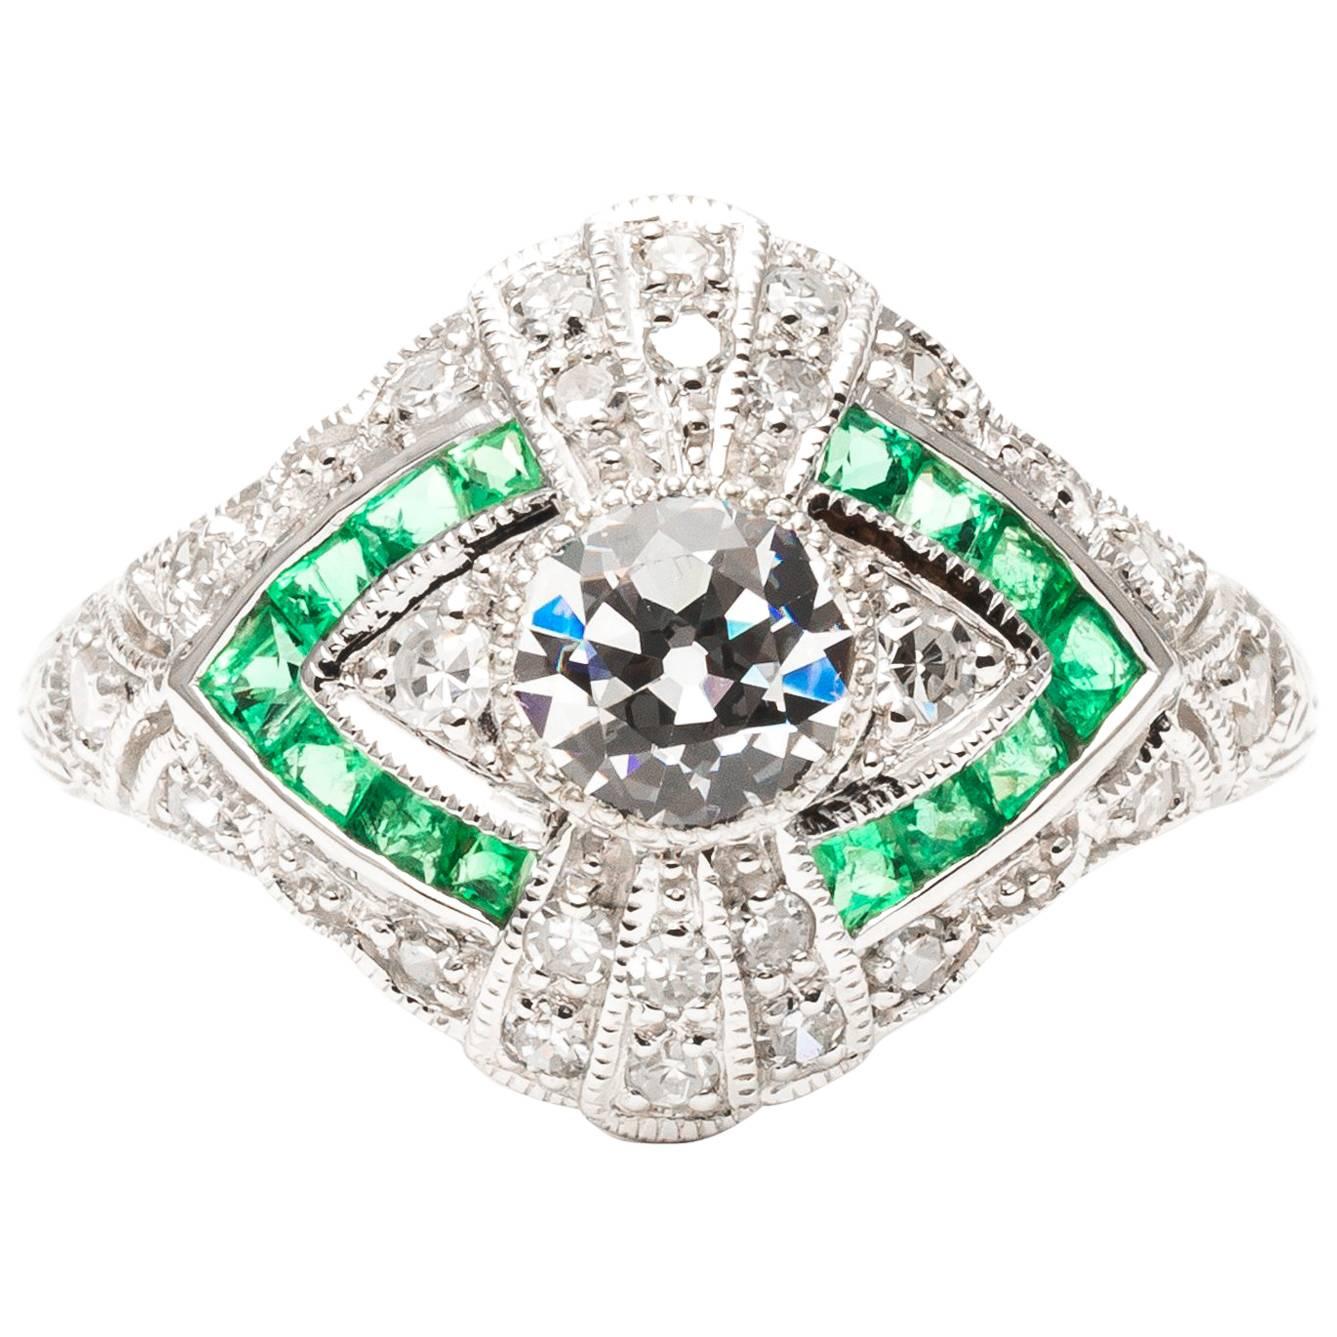 Vibrant French Cut Emerald Diamond White Gold Ring  For Sale